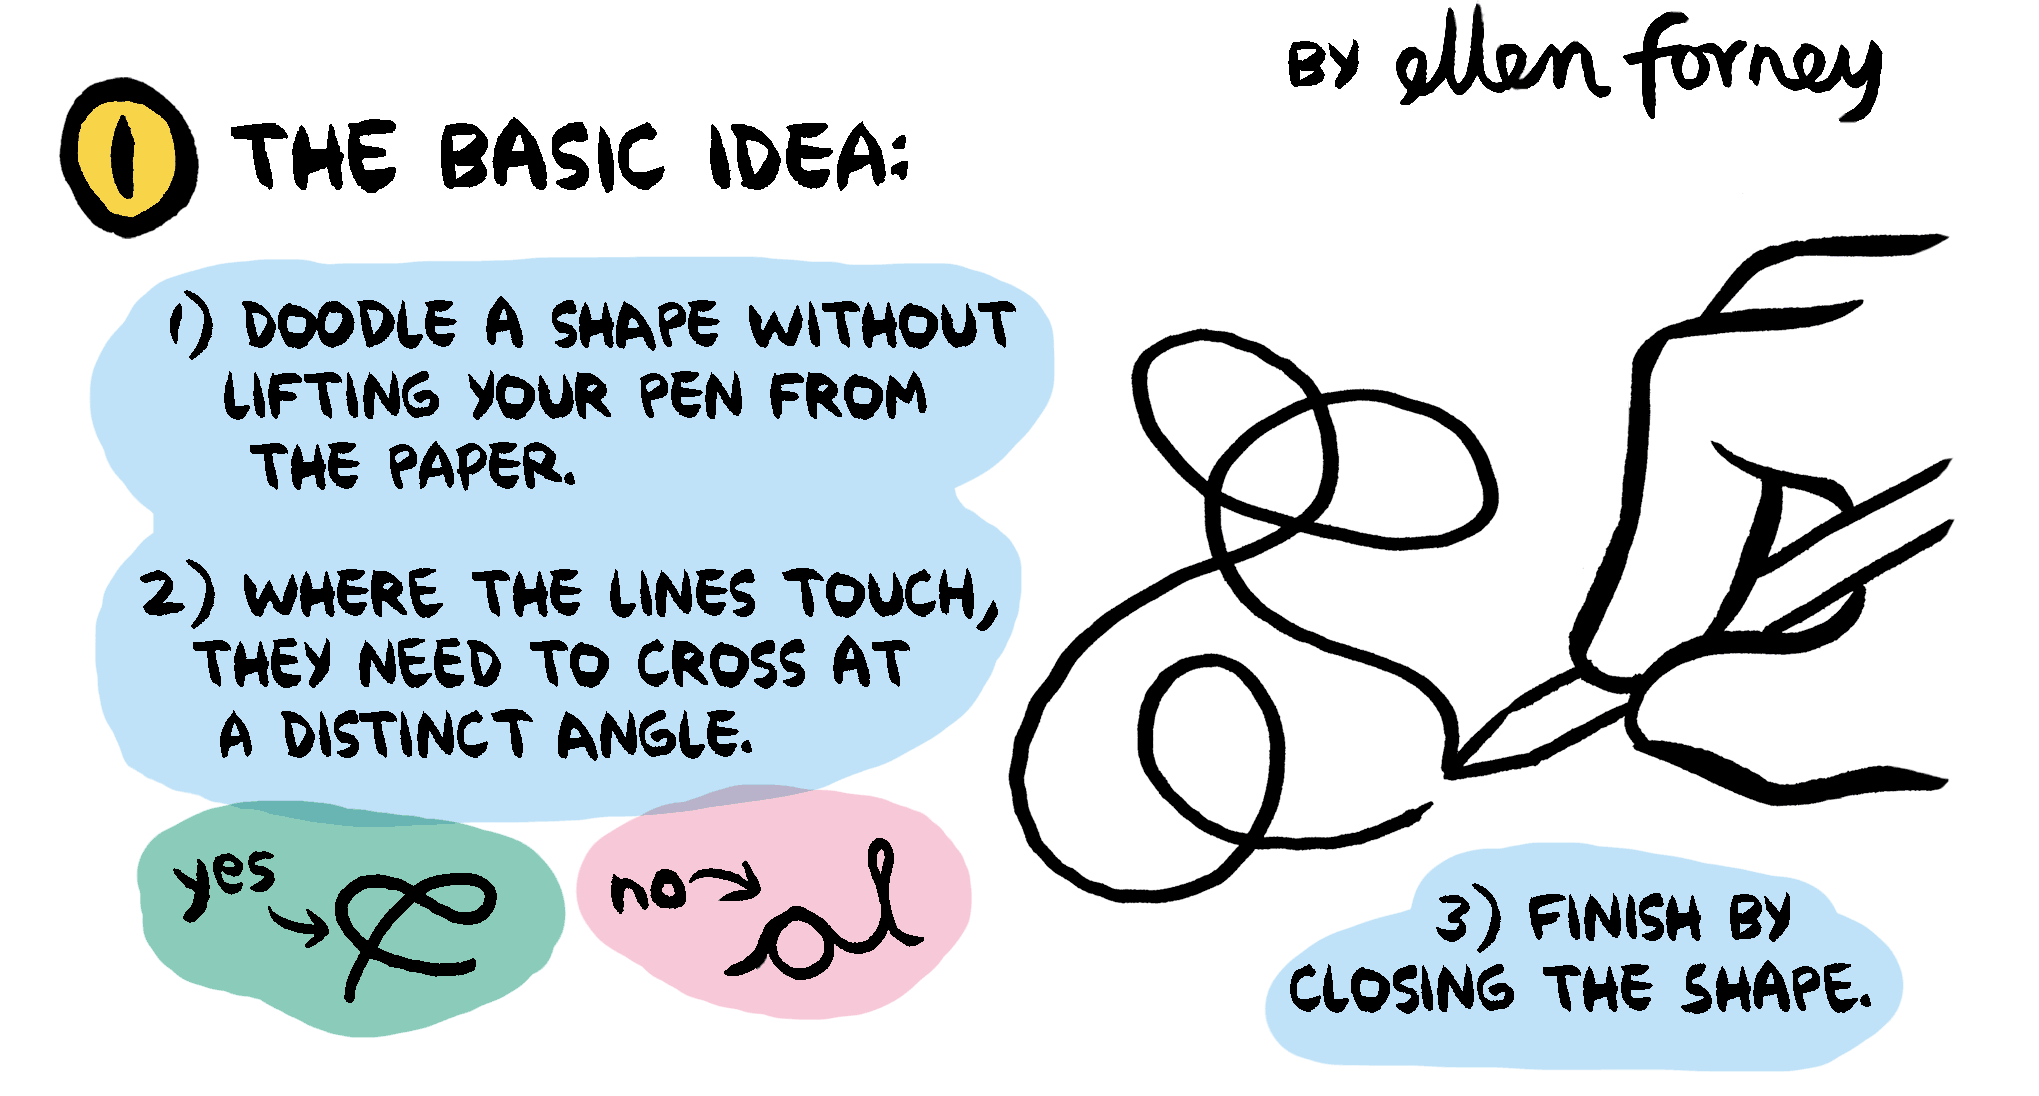 1. The Basic Idea: 1) Doodle a shape witout lifting your pen from the paper. 2) Where the lines touch, they need to cross at a distinct angle. 3) Finish by closing the shape.